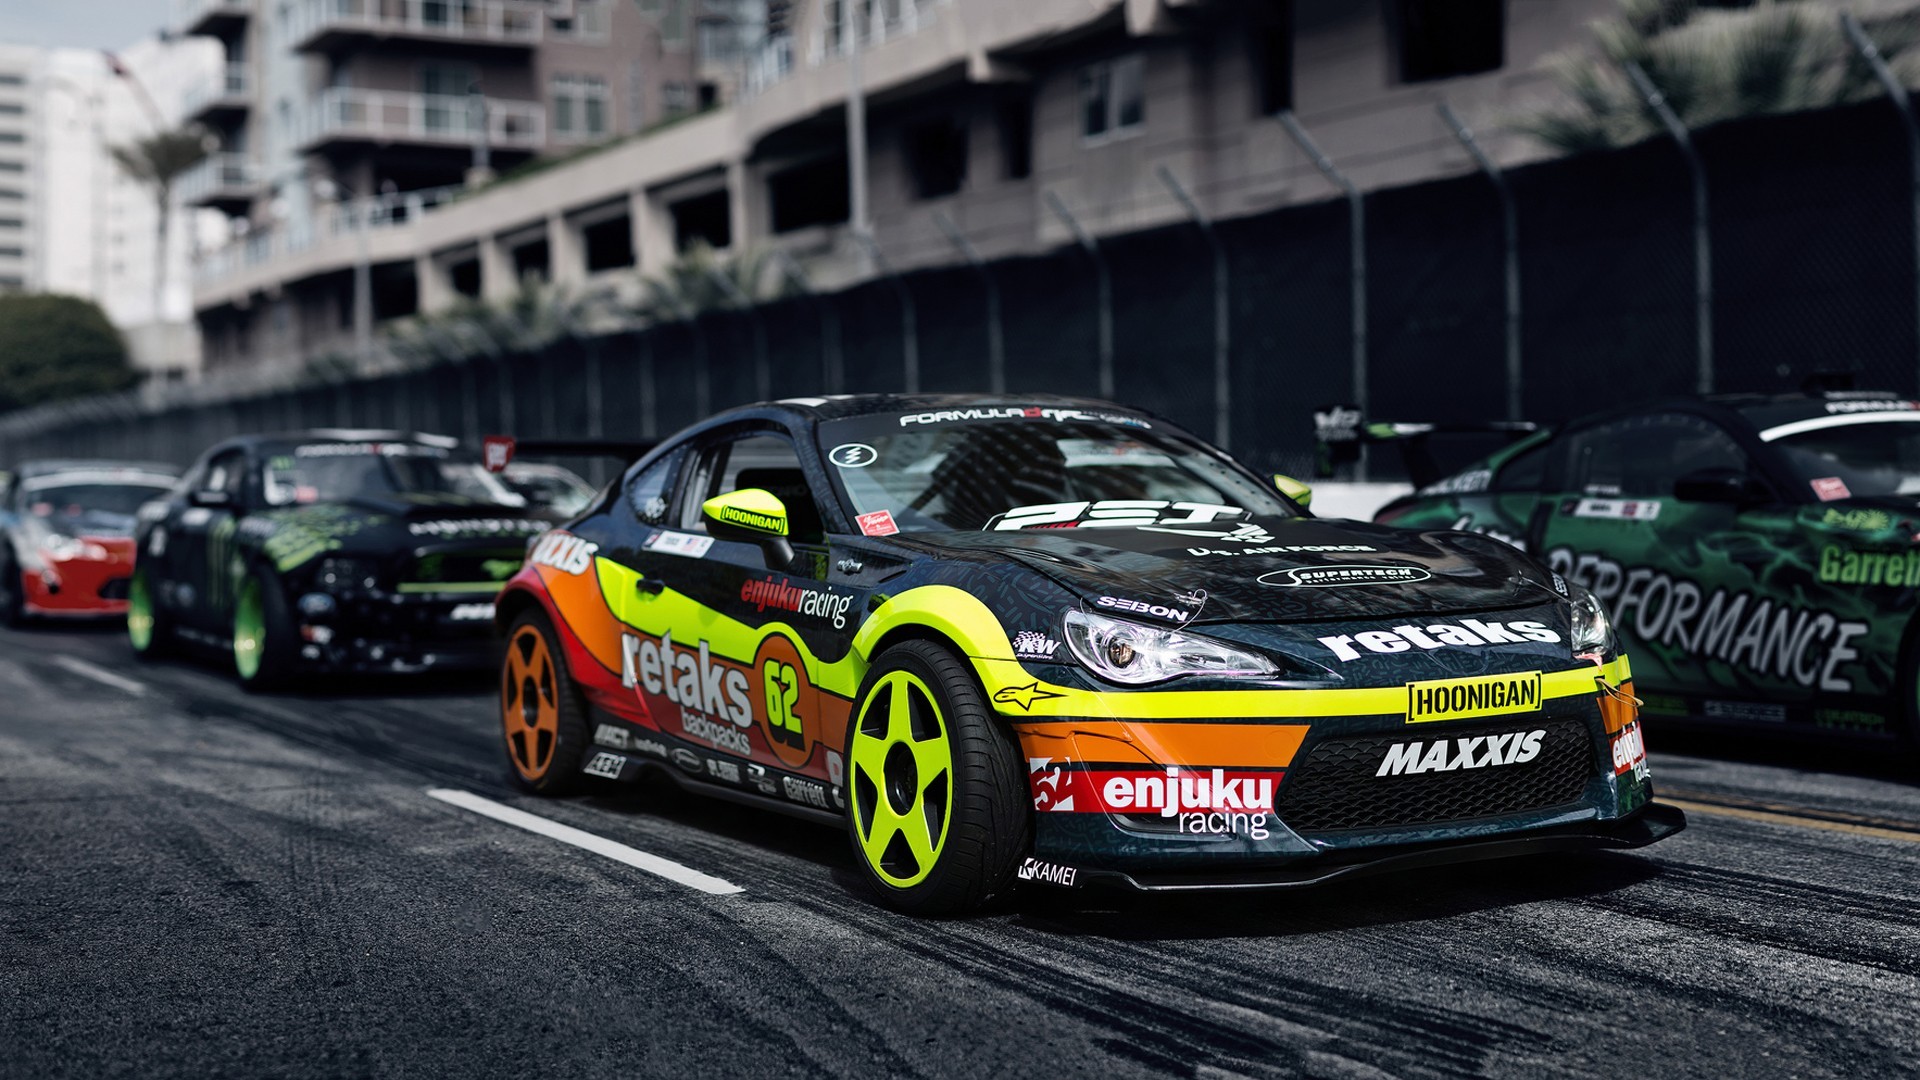 General 1920x1080 drift racing race cars car vehicle Toyota Toyobaru frontal view colored wheels motorsport livery Japanese cars